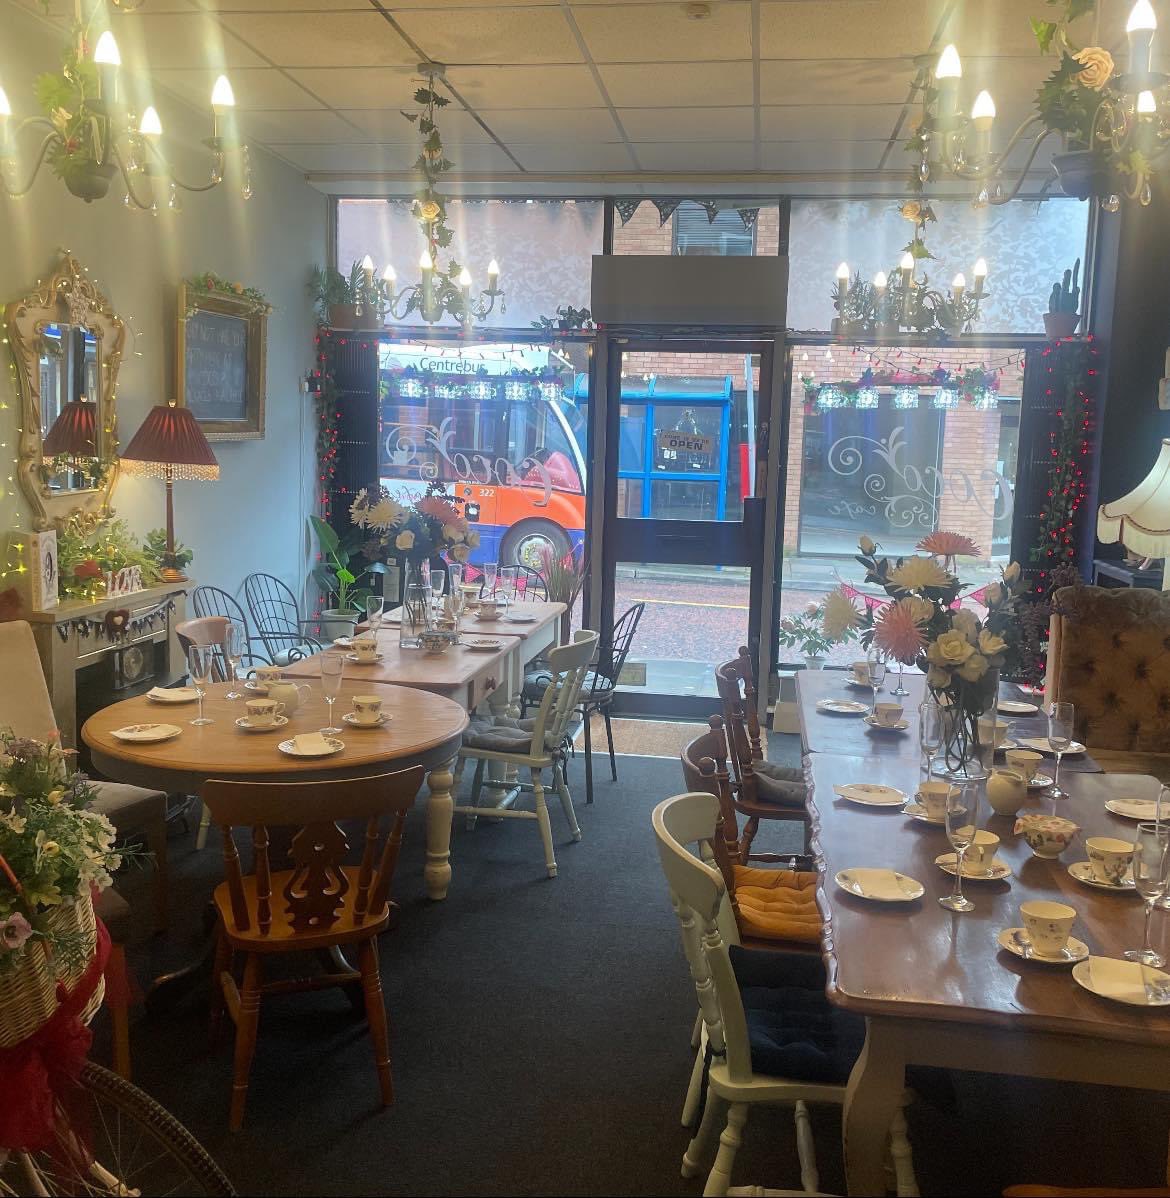 Looking for a party venue? Or a space to get together with friends and family? Coco Melton has a beautiful upstairs room and party packages just for you #melton #partyvenue #partypackage #afternoontea